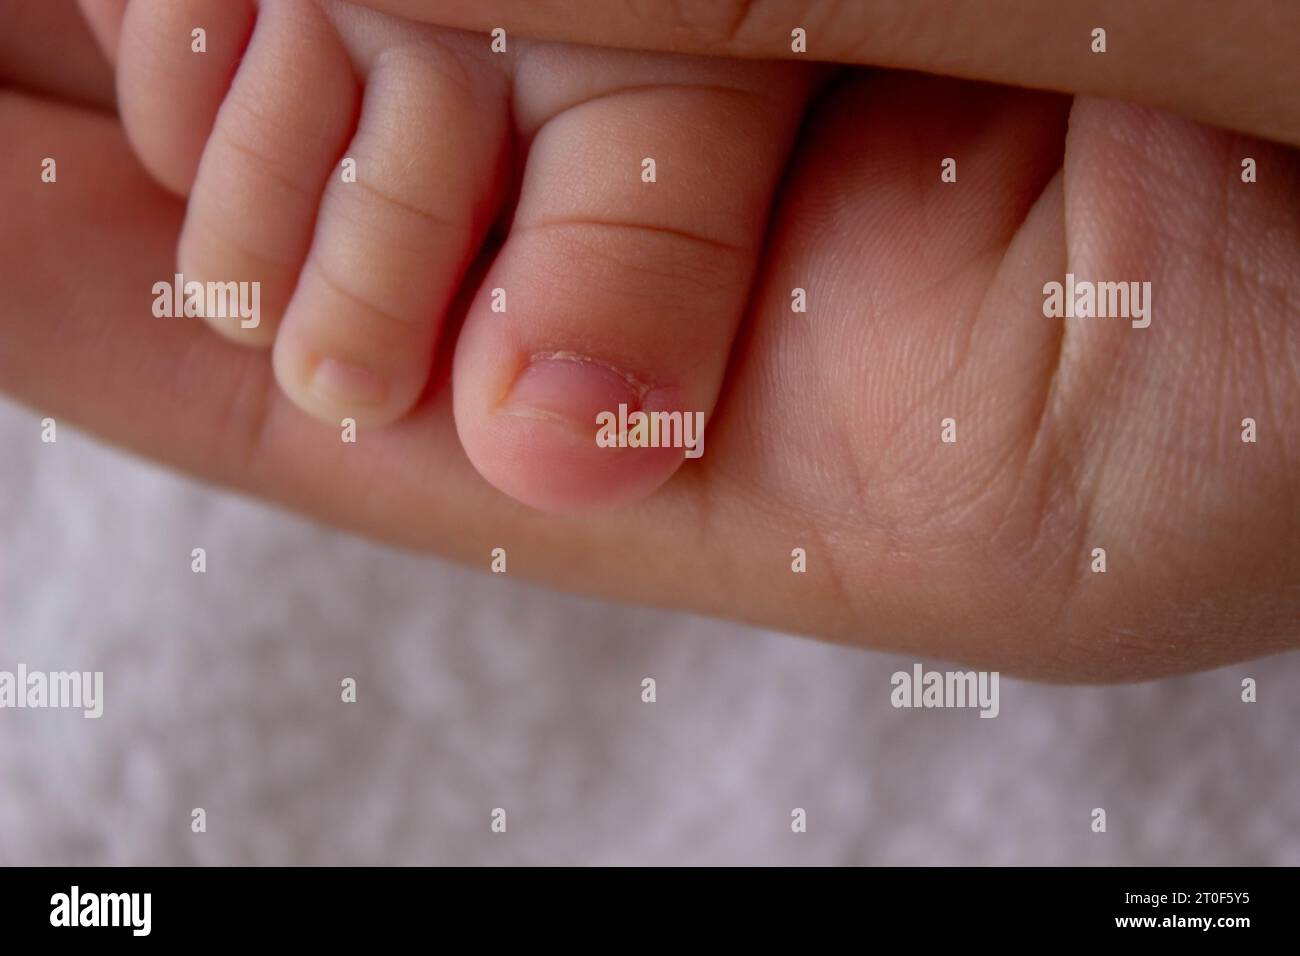 Series of painful finger nail skin infection with pus treatment Stock Photo  by ©Thamkc 259047140